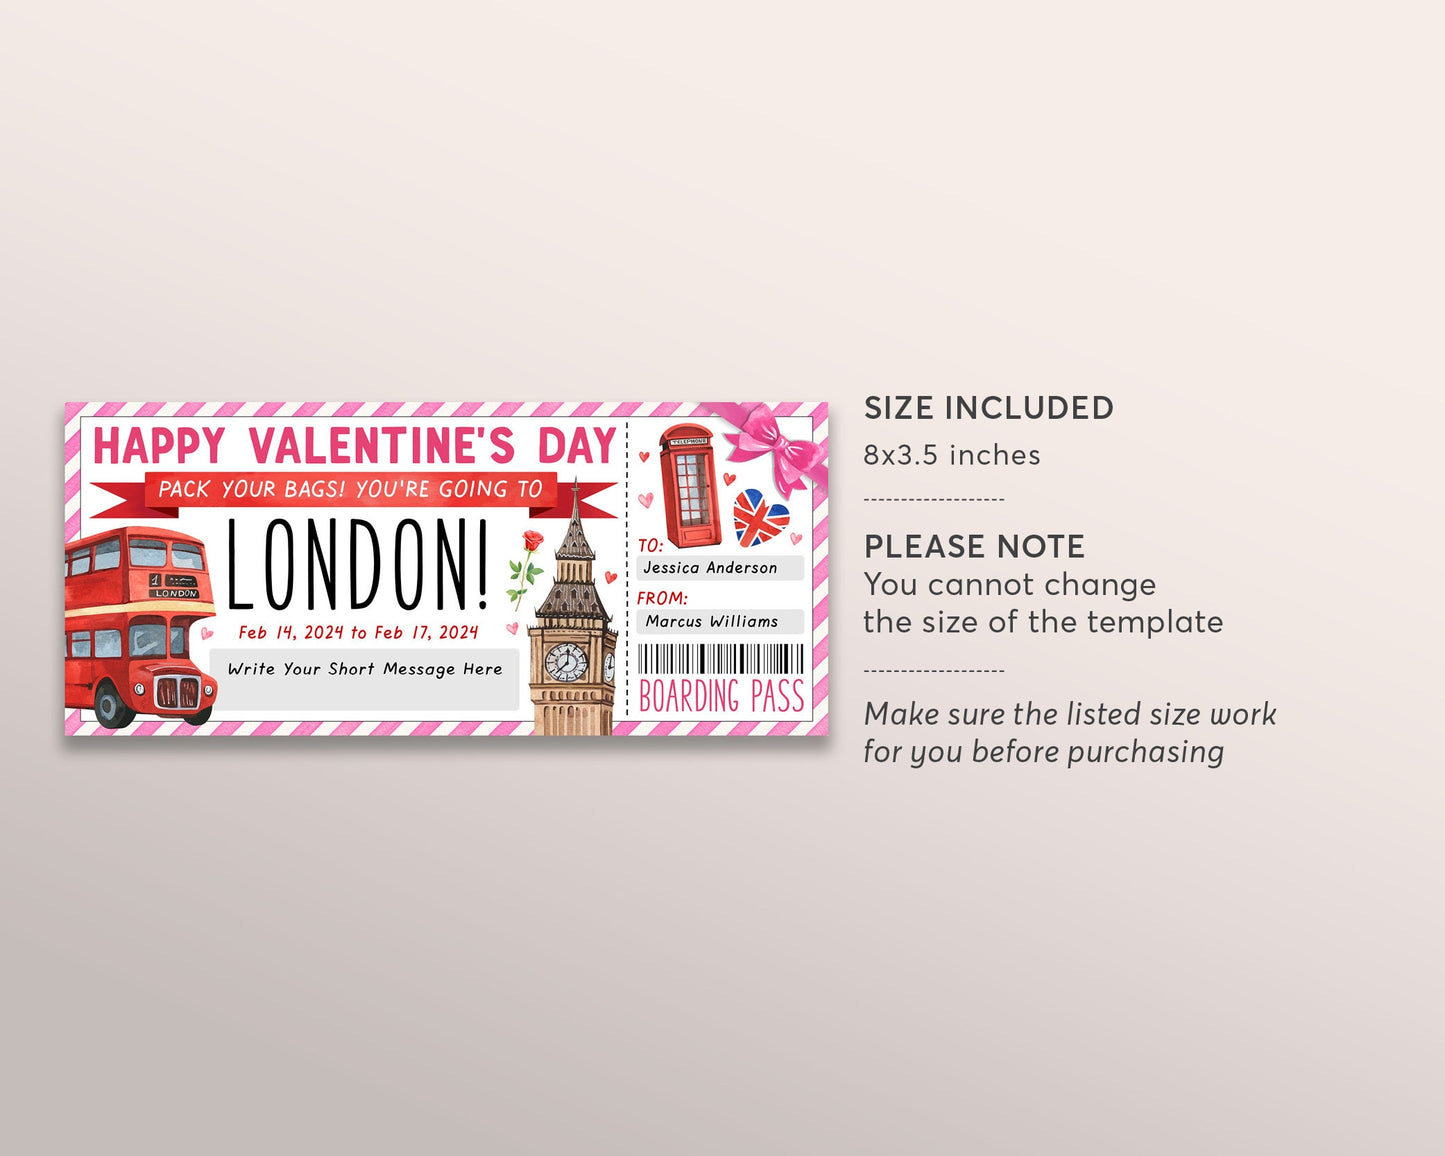 Valentines Day London Gift Ticket Boarding Pass Editable Template, Surprise Travel Vacation Plane Ticket Certificate, England Holiday Trip